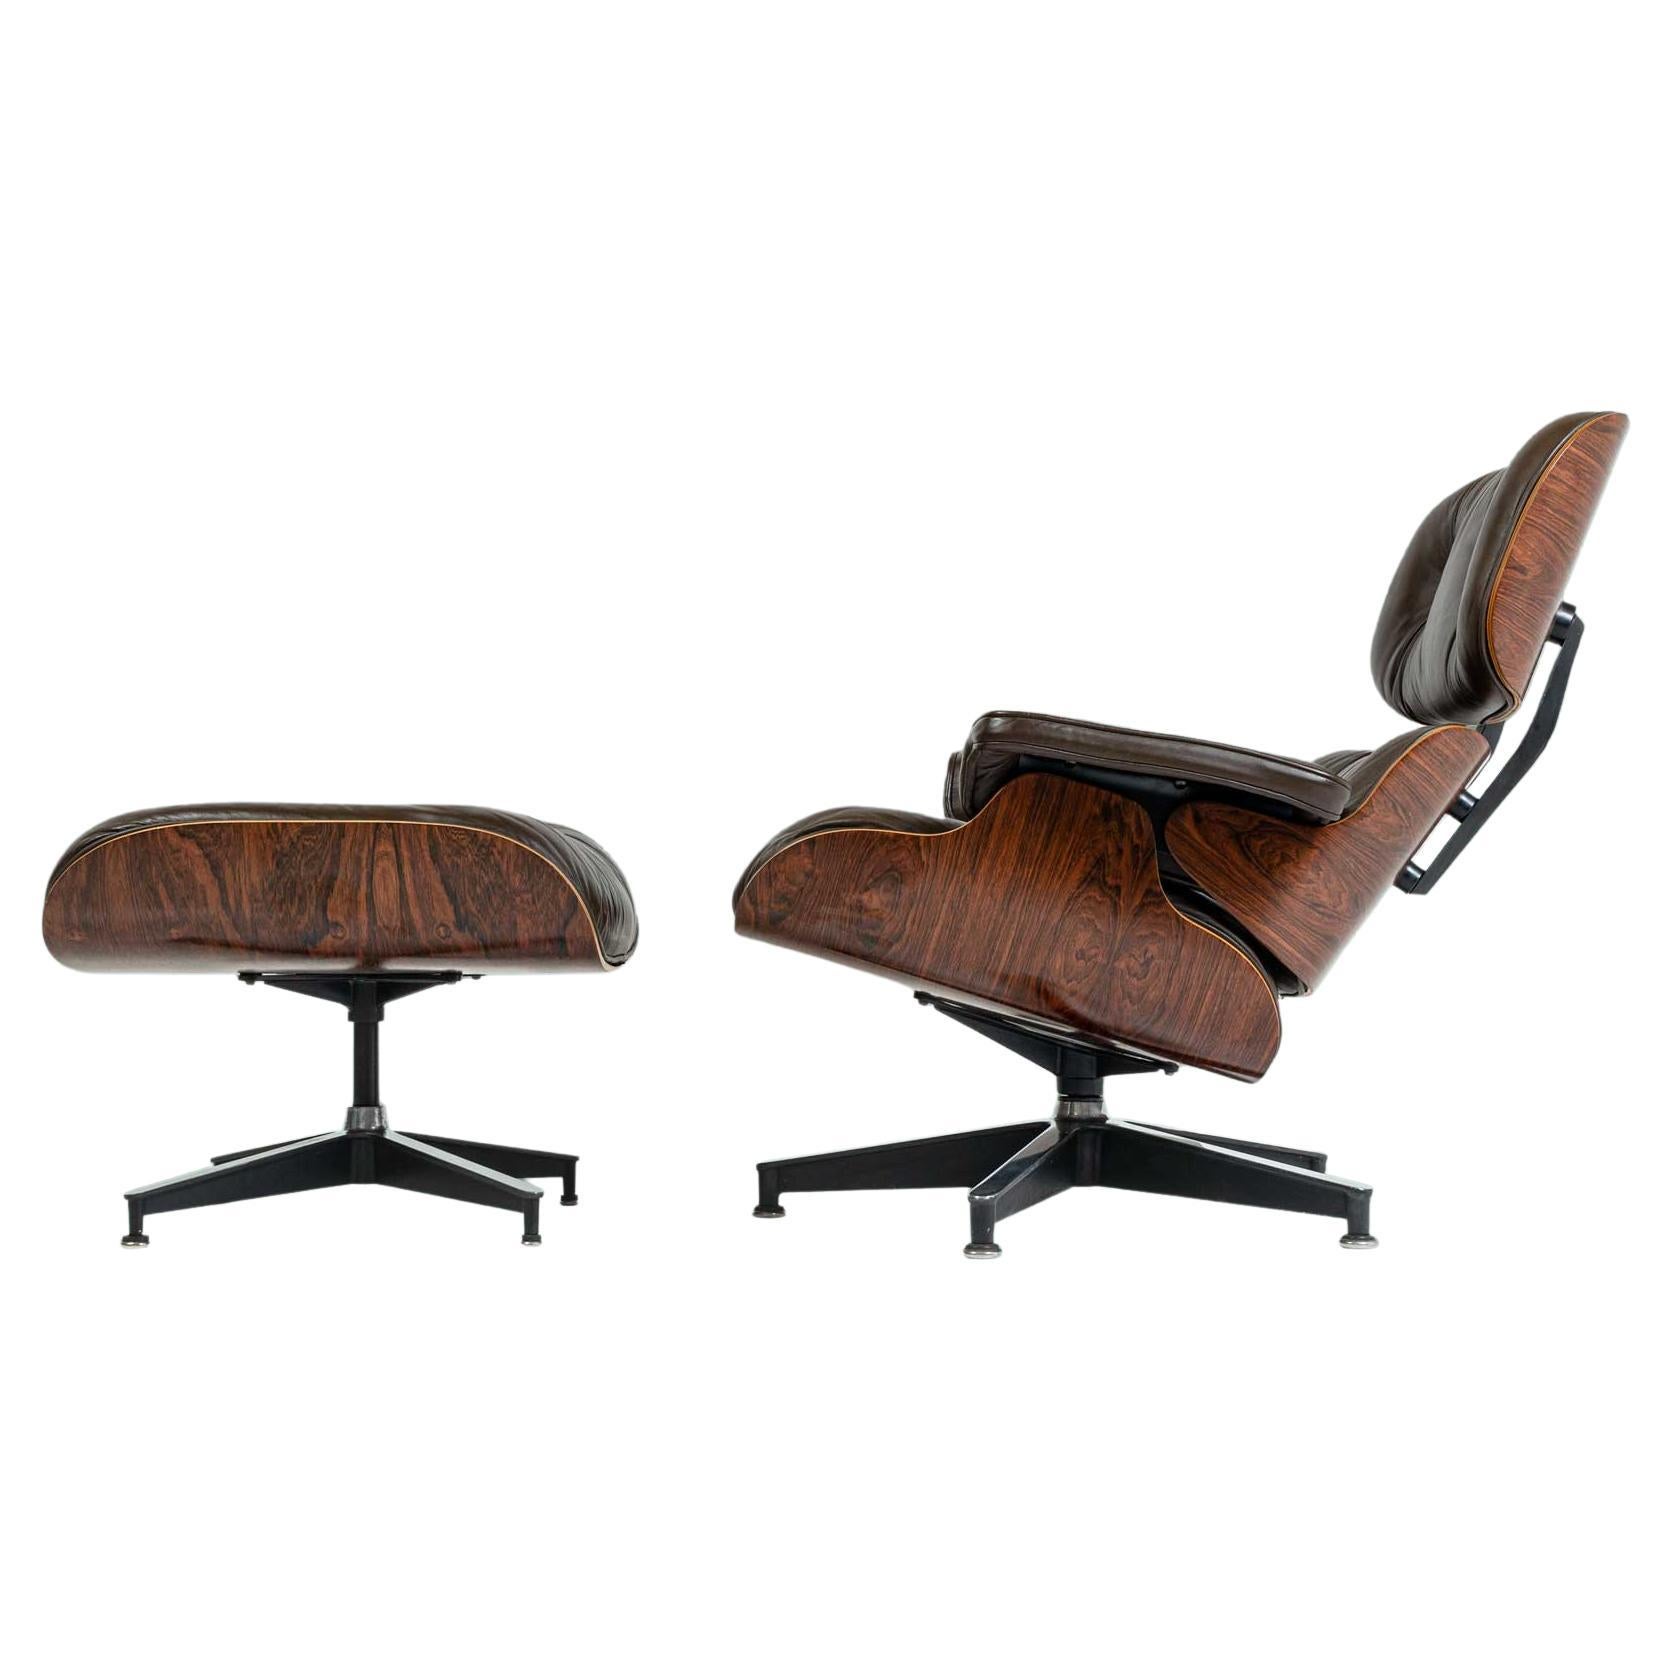 3rd Gen Eames Lounge Chair 670-671 in Original Chocolate Leather For Sale